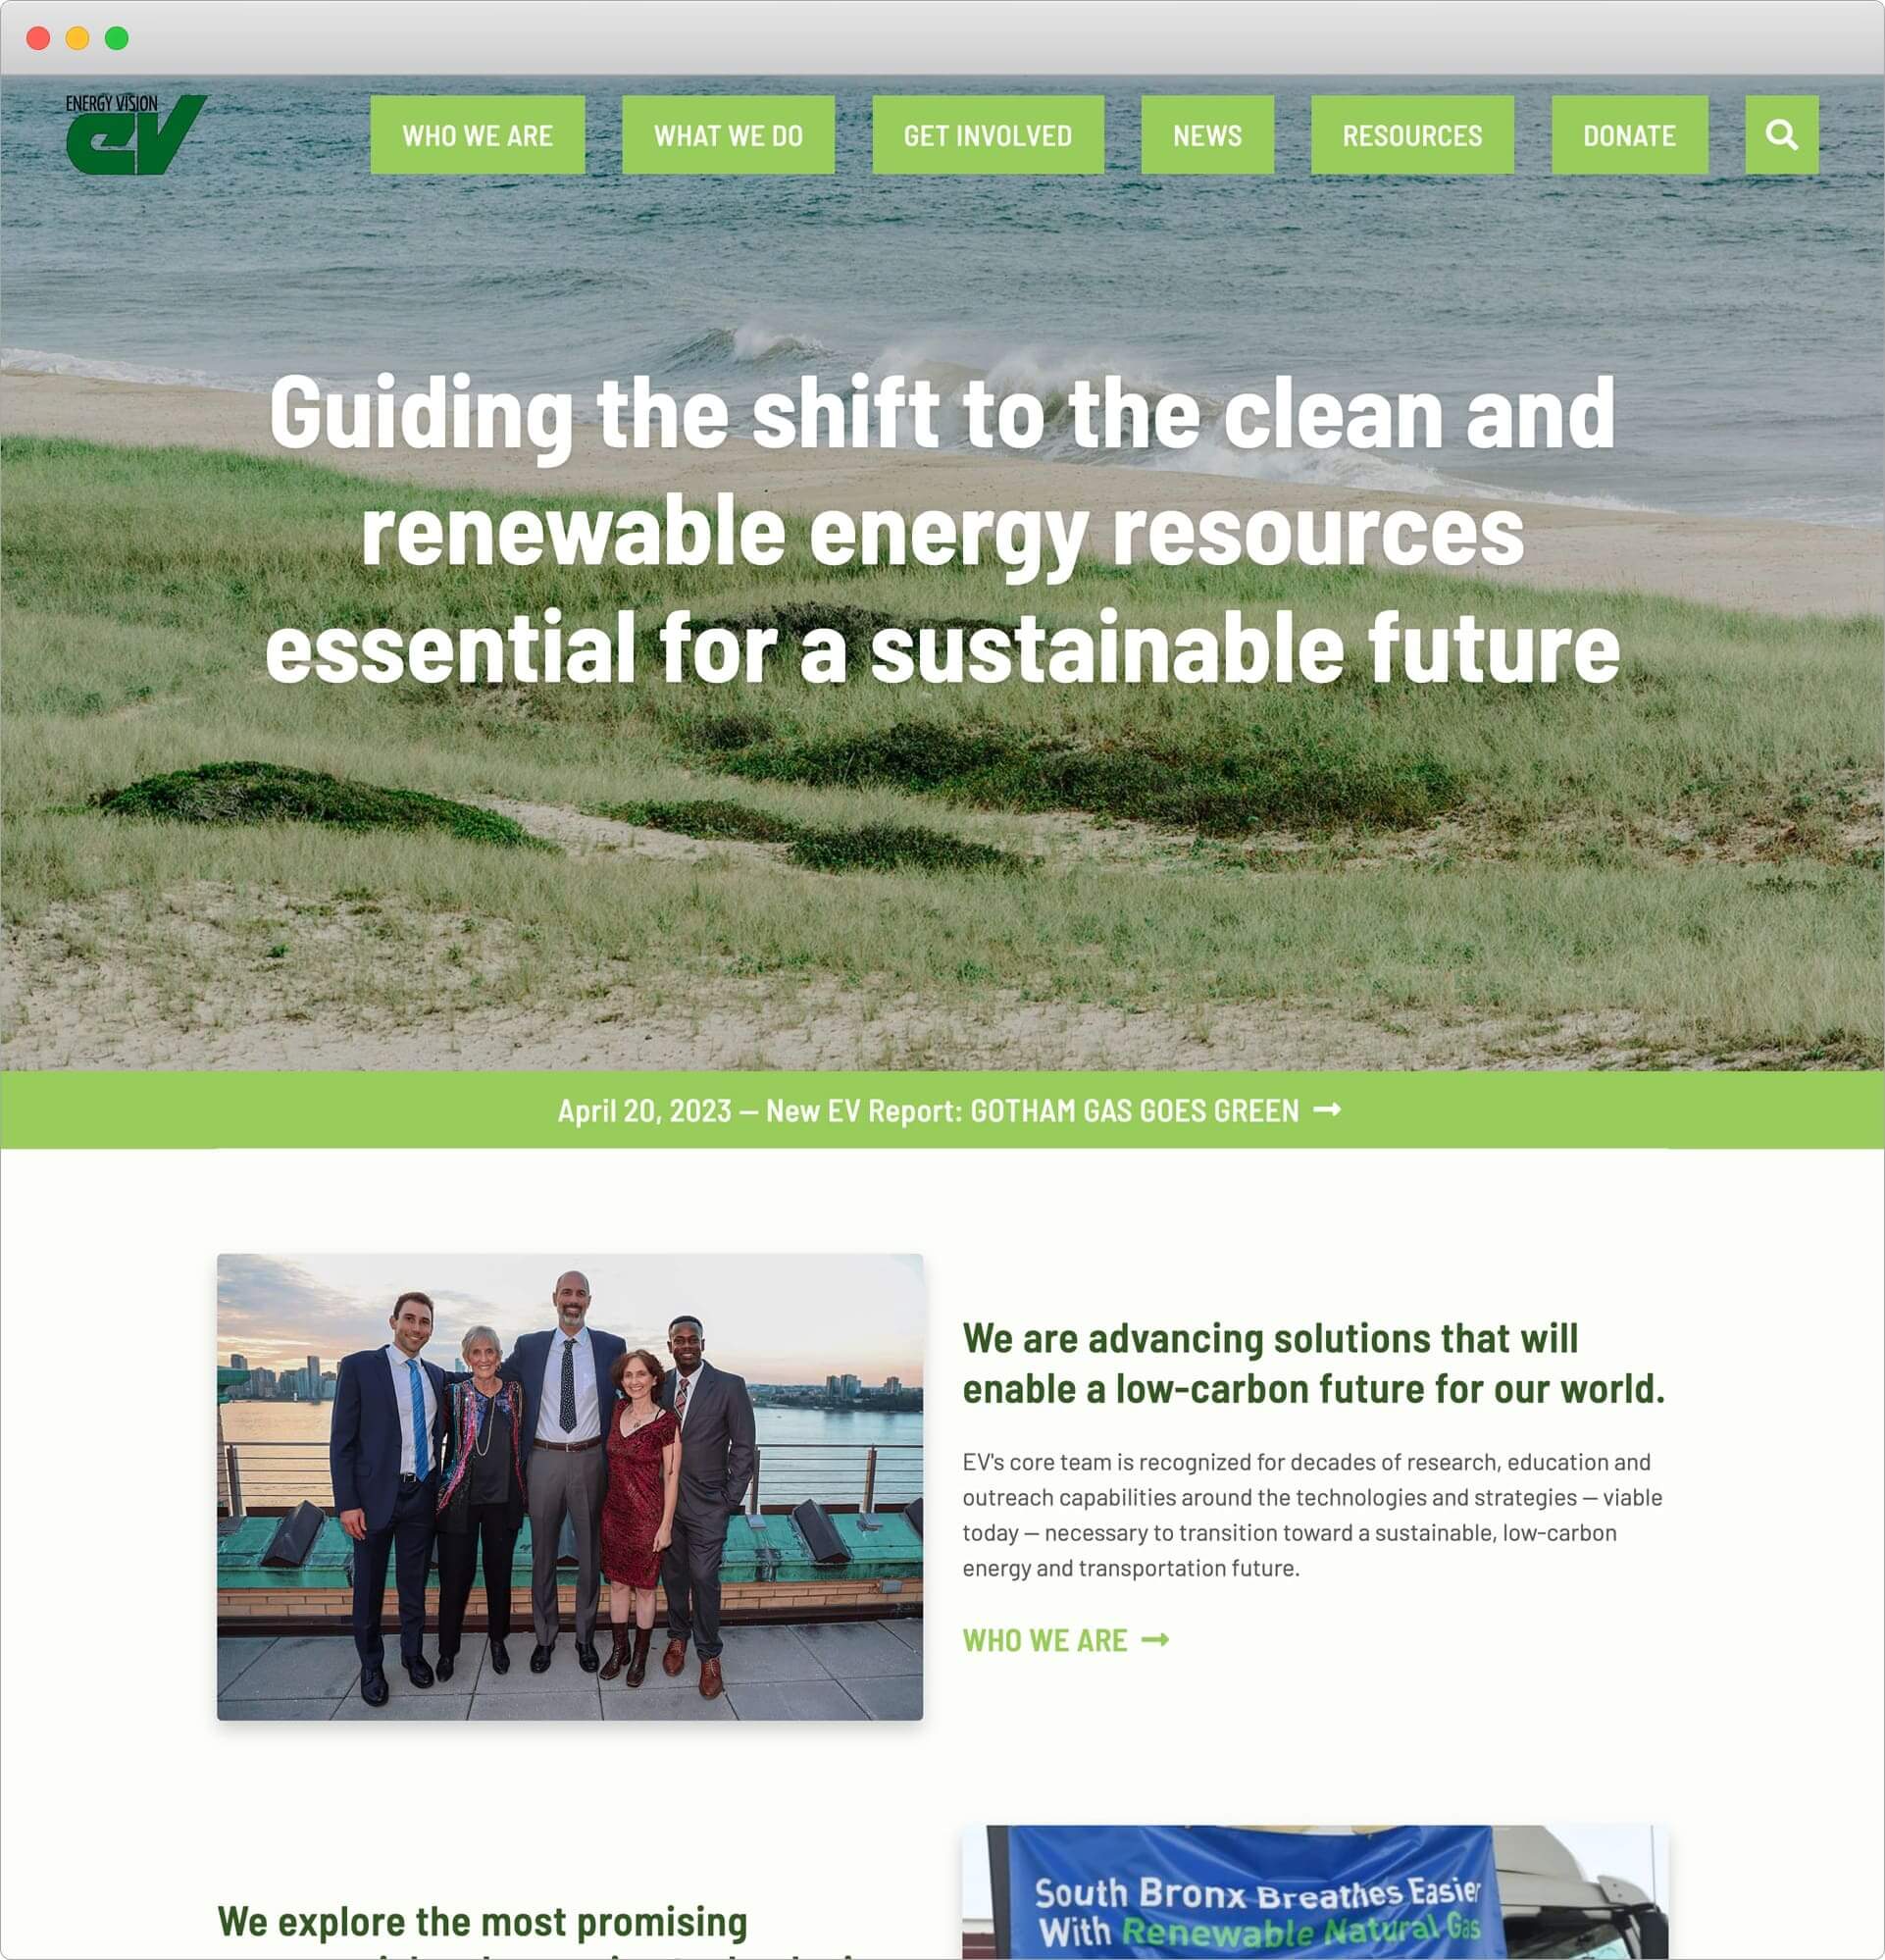 A screenshot of the Energy Vision website home page